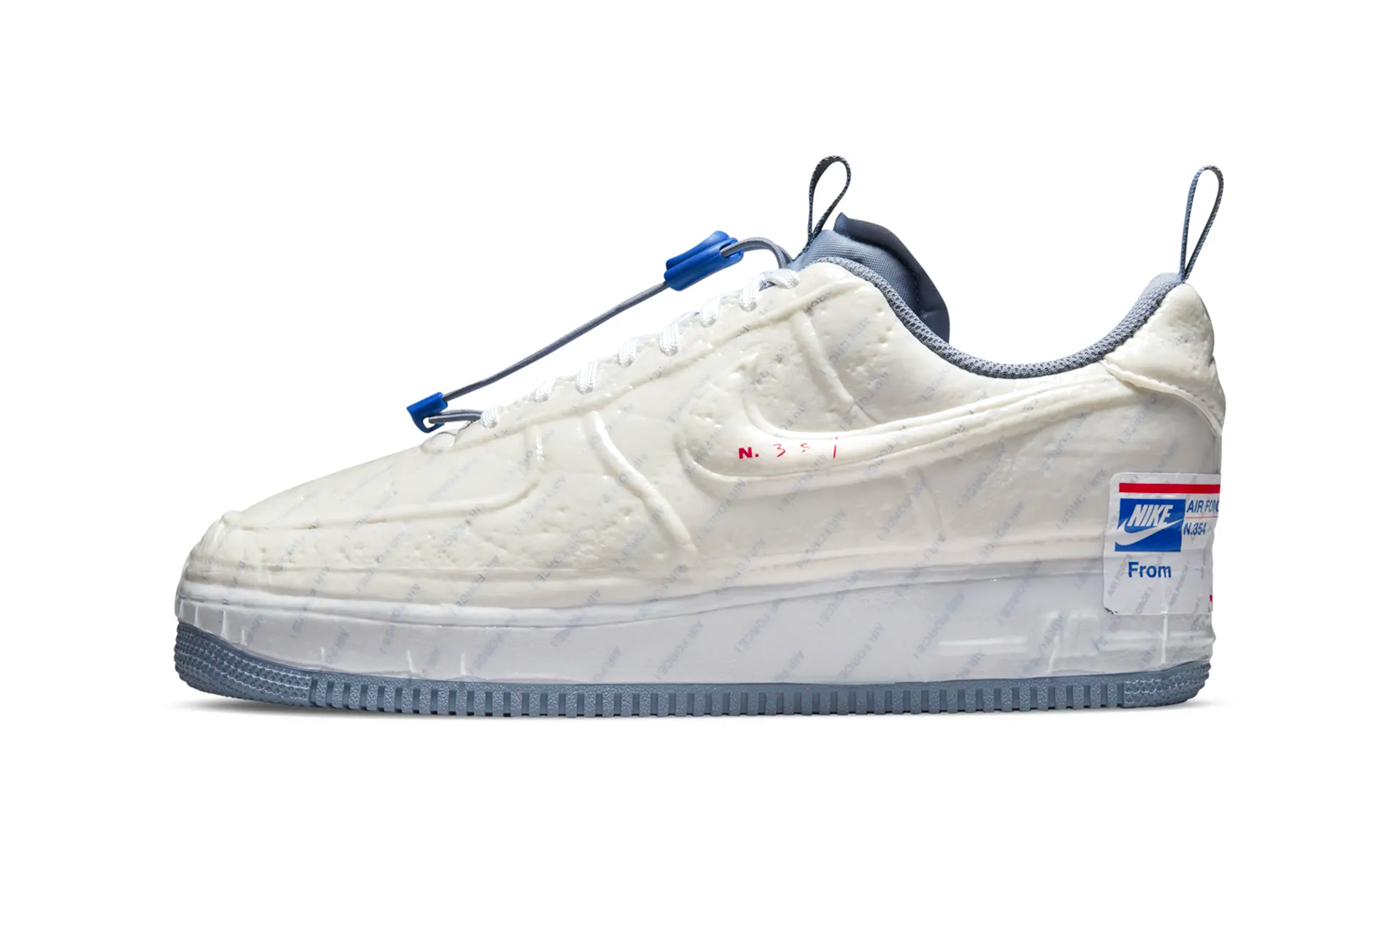 USPS x Nike Air Force 1 Low Experimental